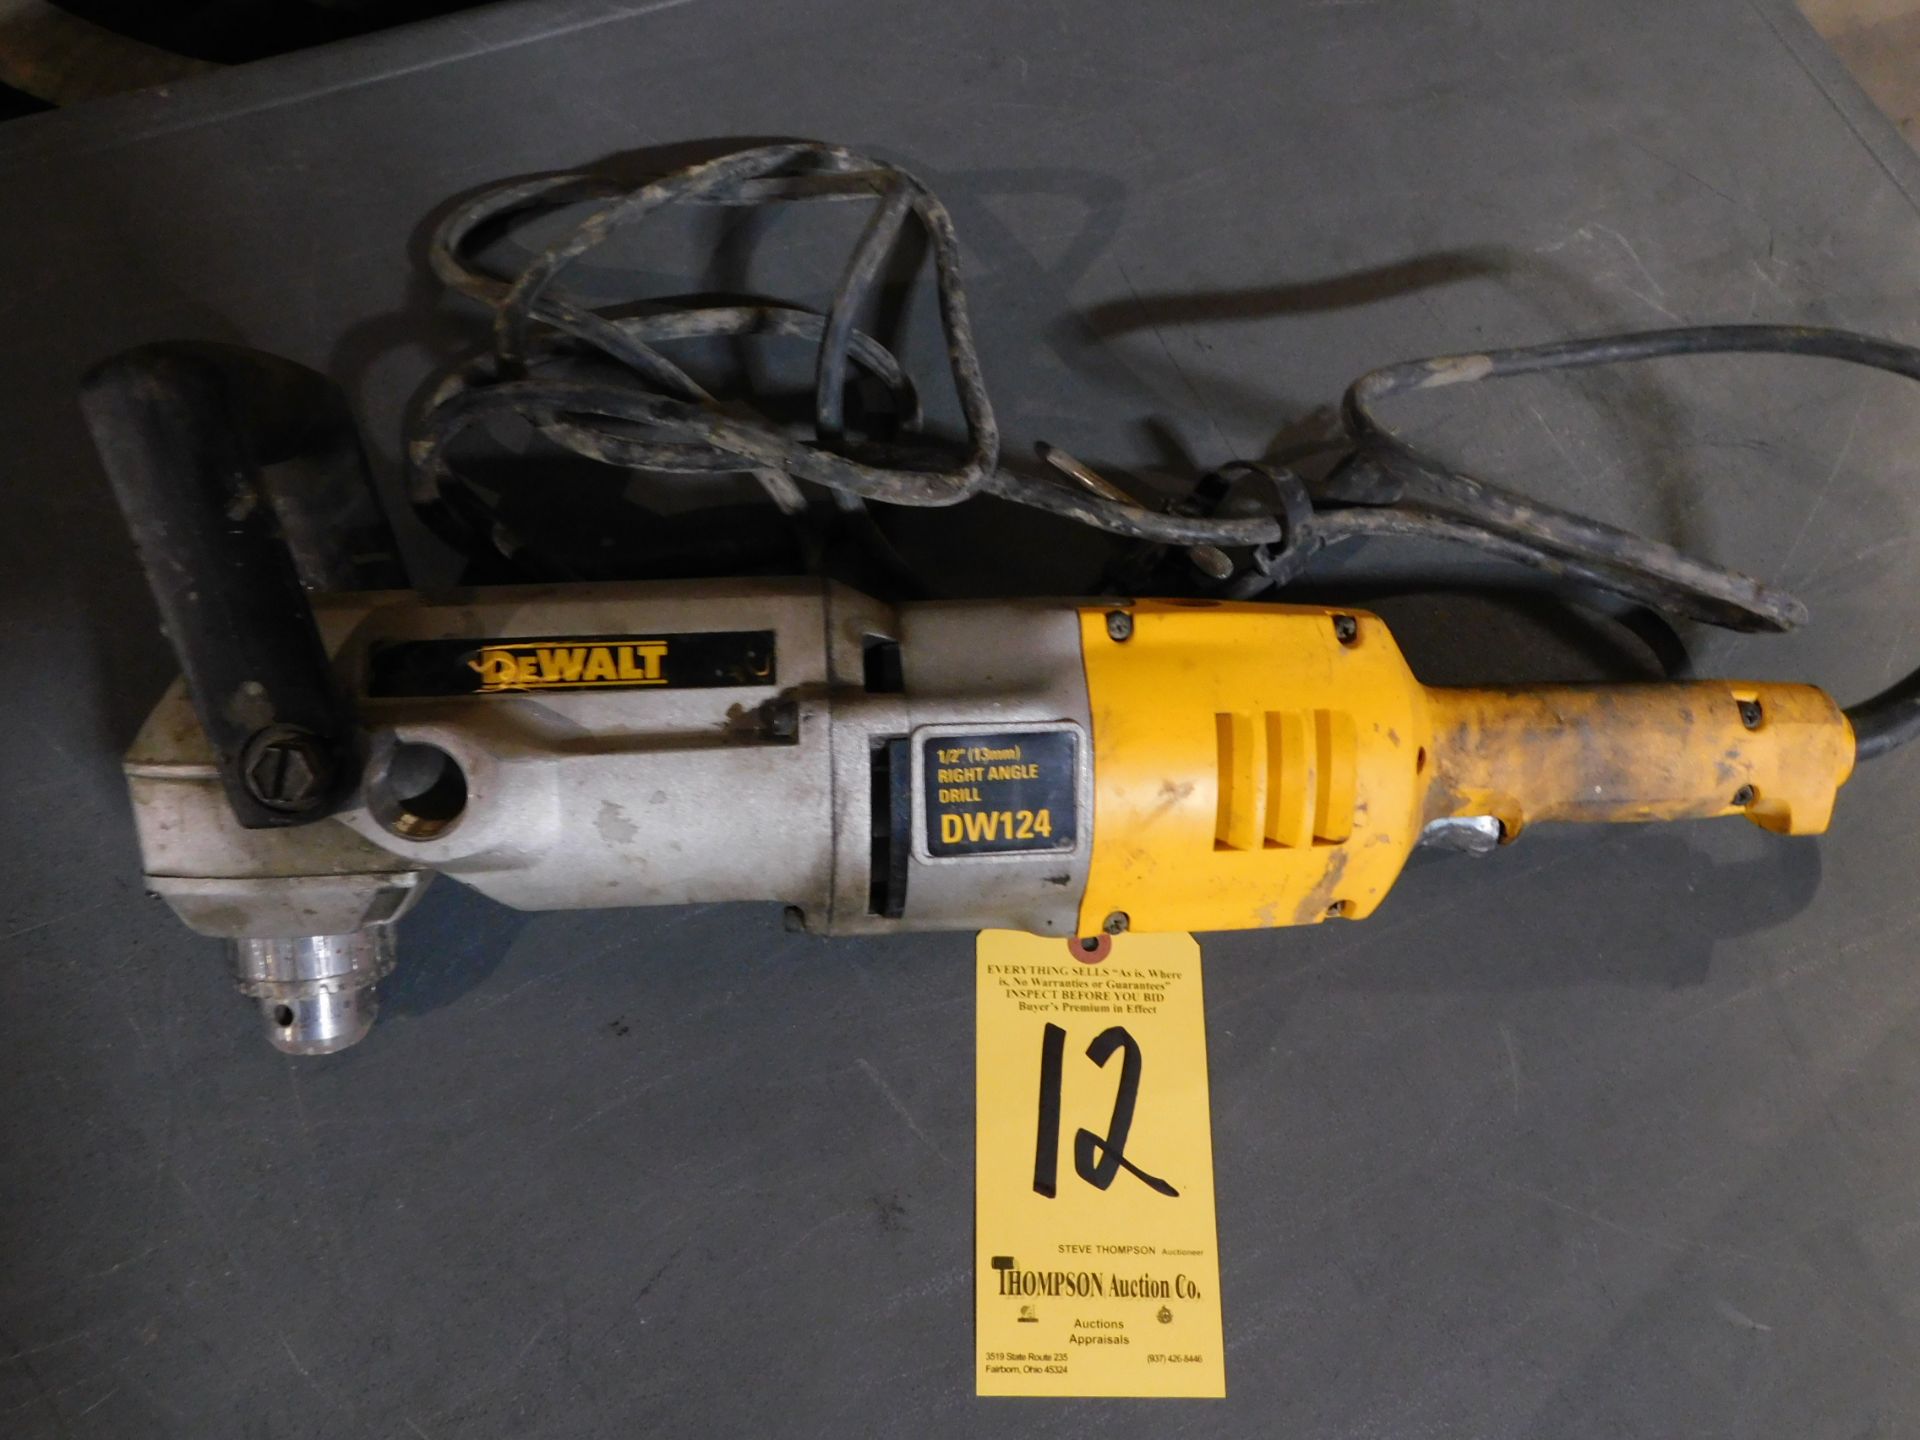 Dewalt DW 124 1/2" Right Angle Drill with Case